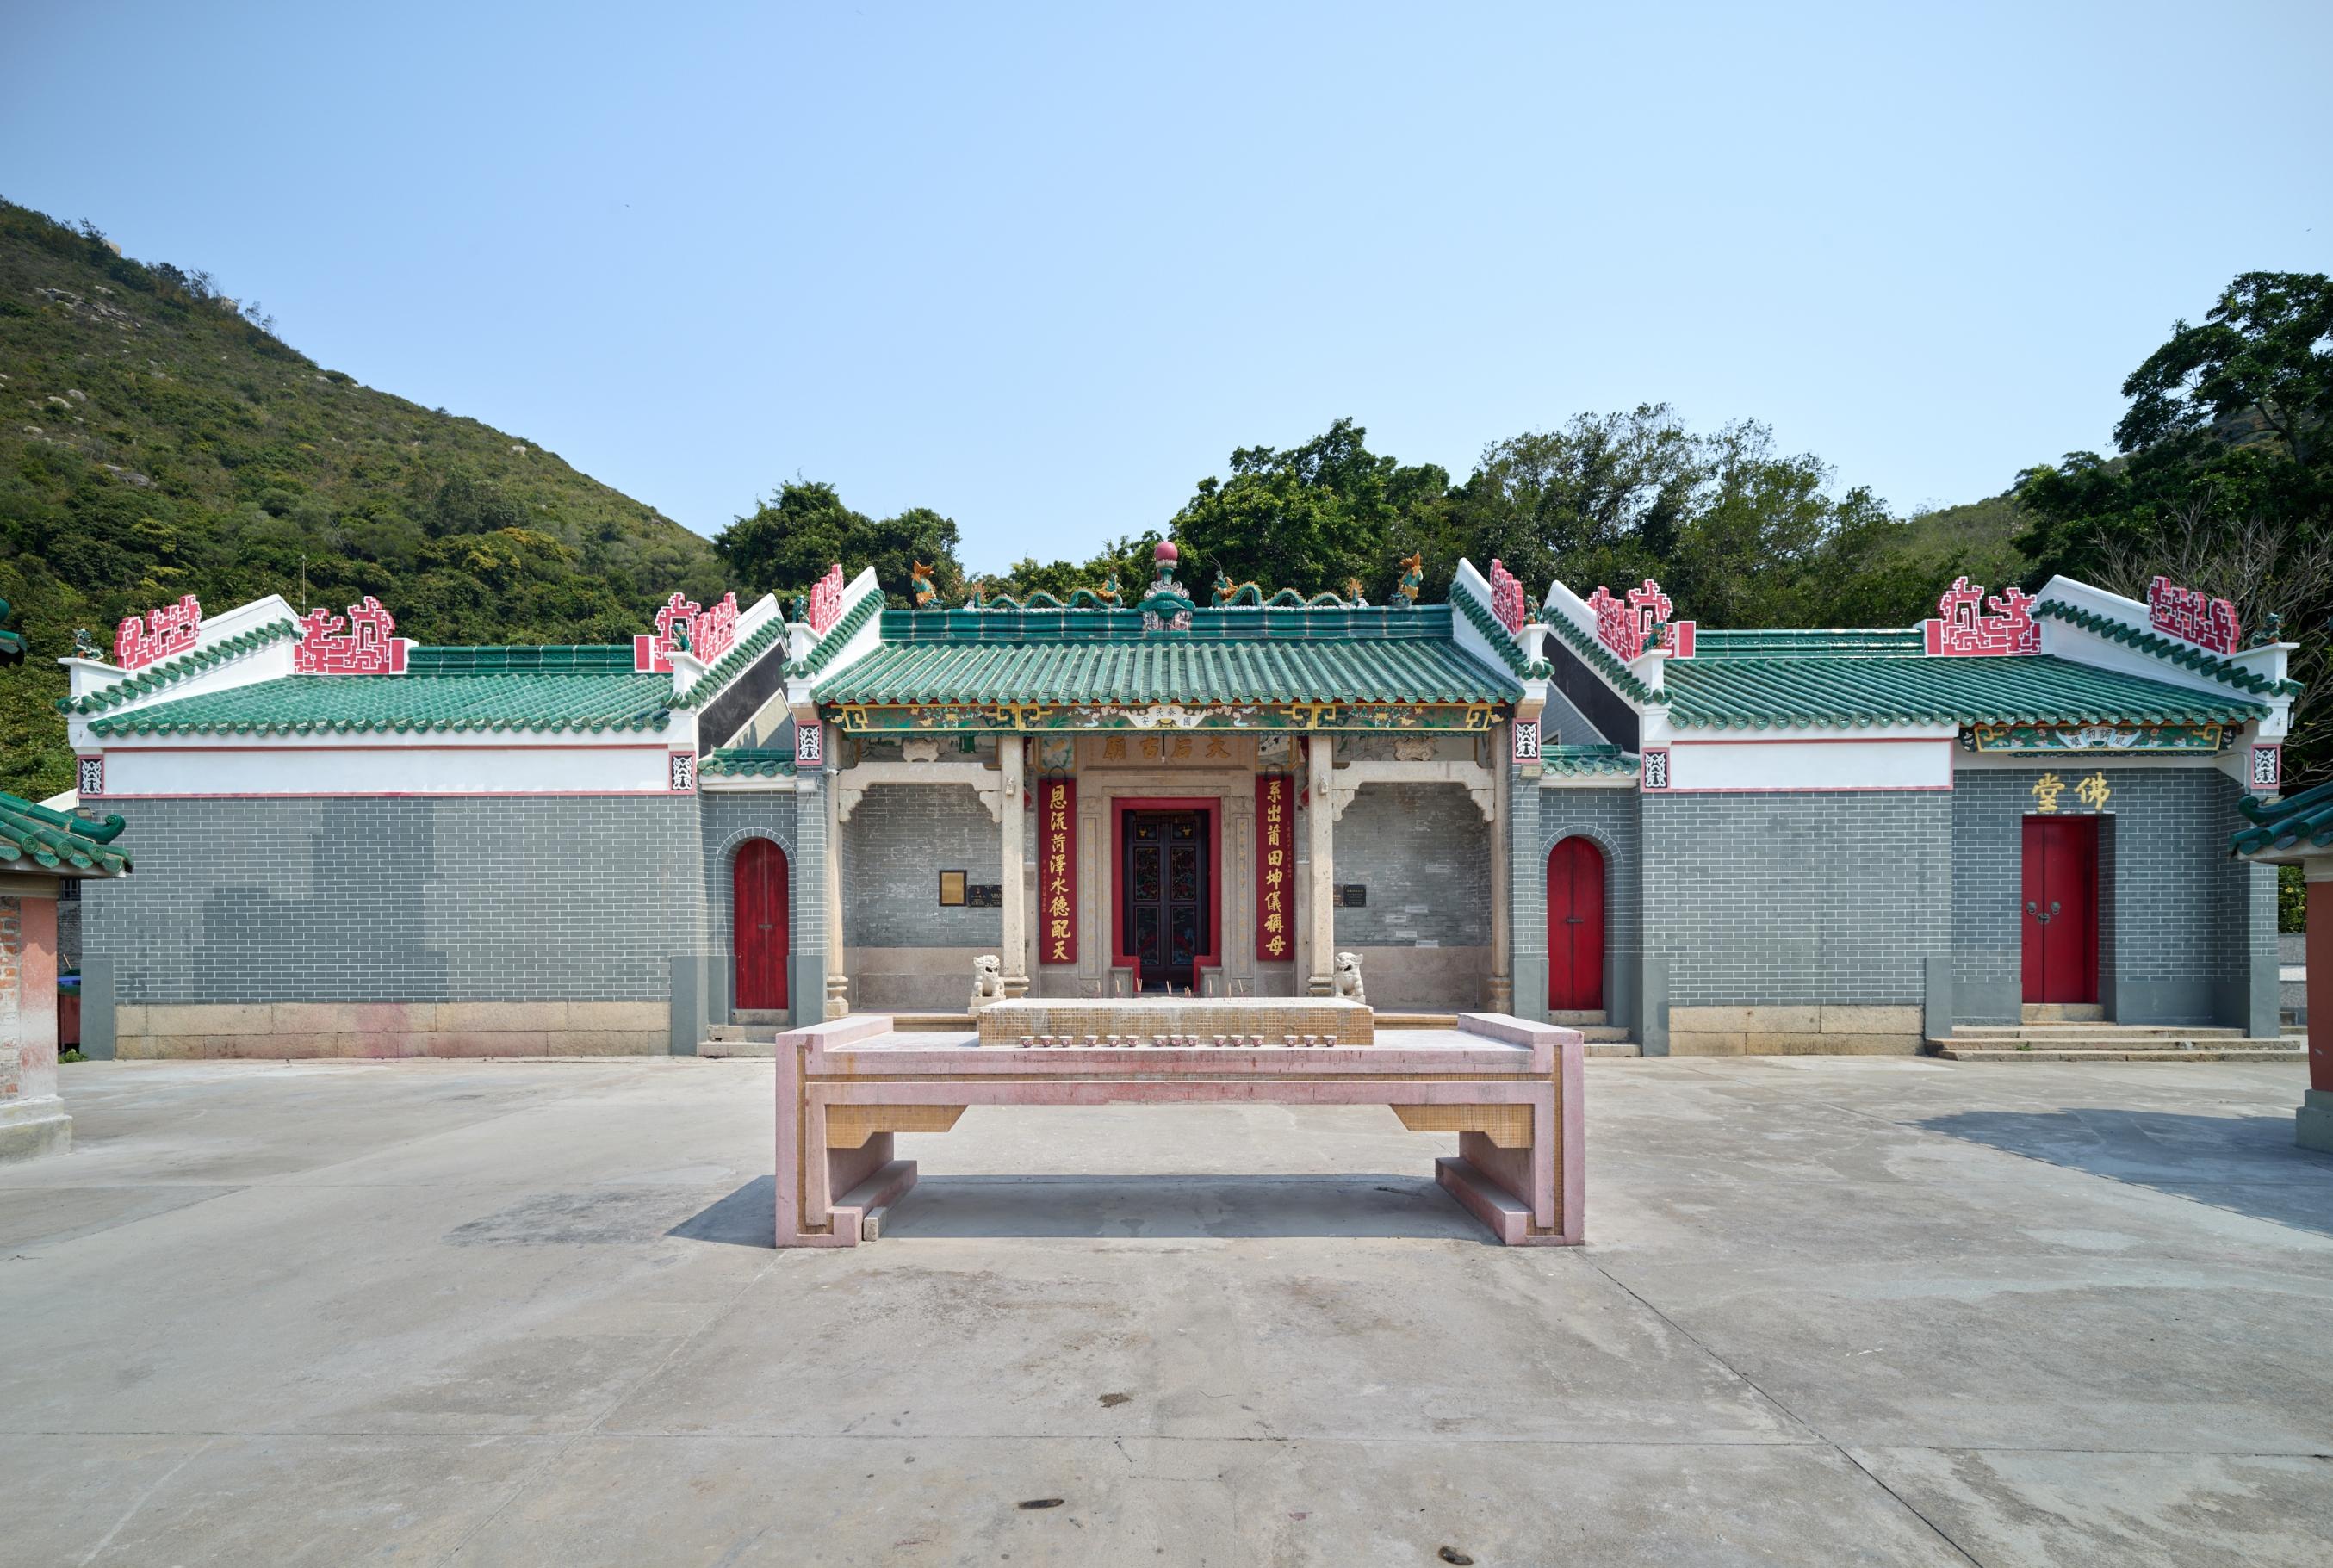 The Government gazetted today (October 20) the declaration of the Tin Hau Temple at Joss House Bay (the Temple) in Sai Kung as a monument under the Antiquities and Monuments Ordinance. Photo shows the front facade of the Temple.